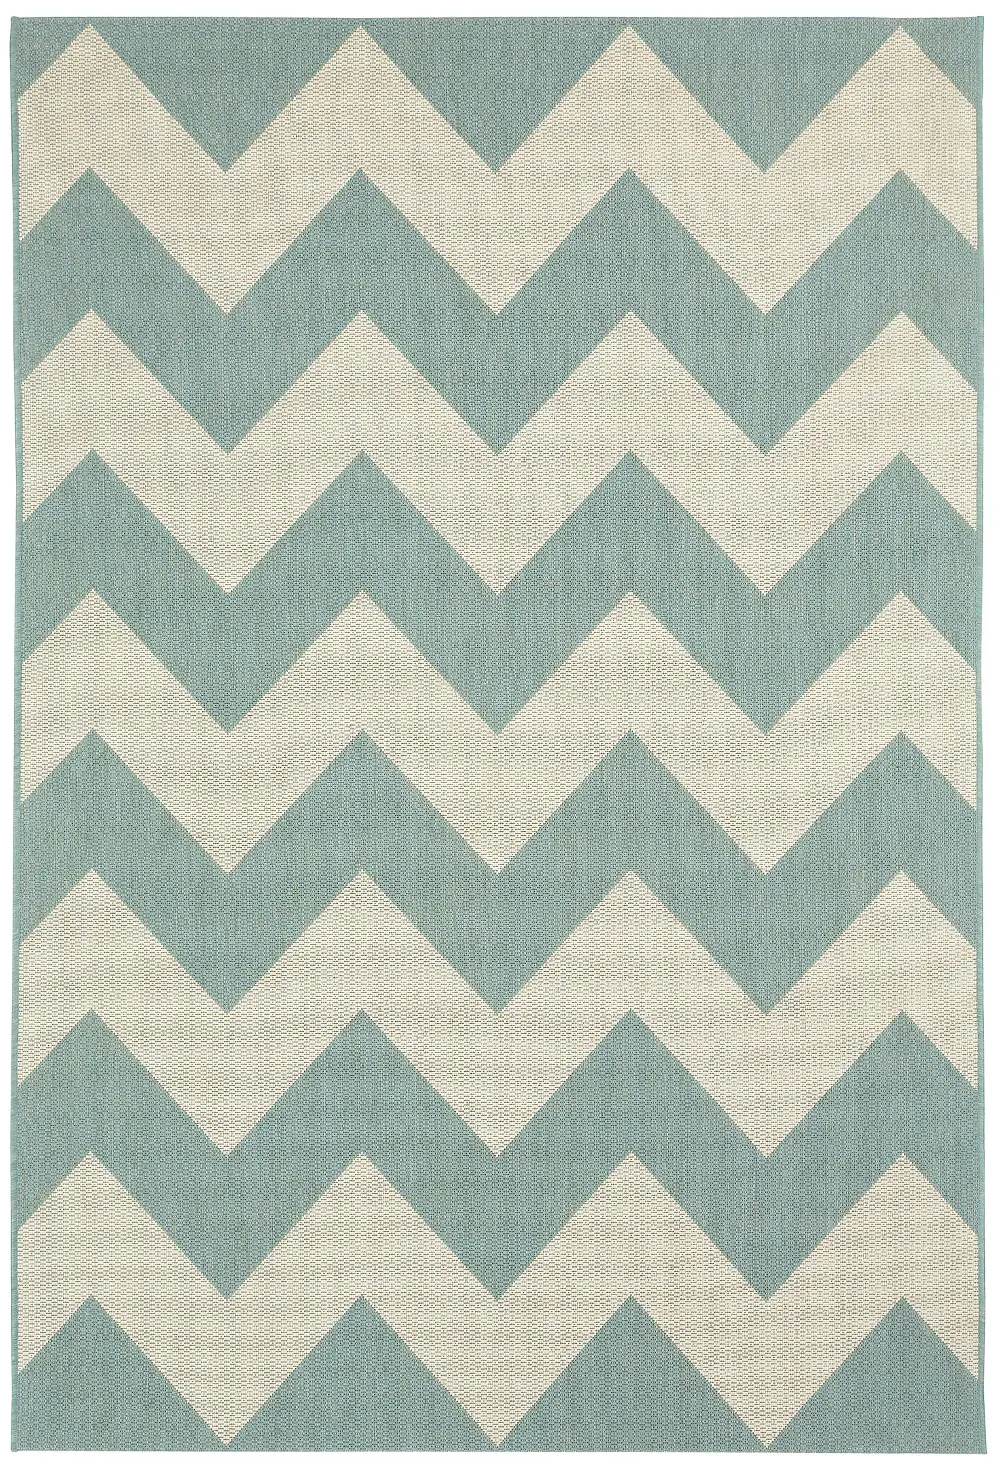 472642035 4 x 6 Small Chevron Spa Blue Indoor-Outdoor Rug - Finesse-1